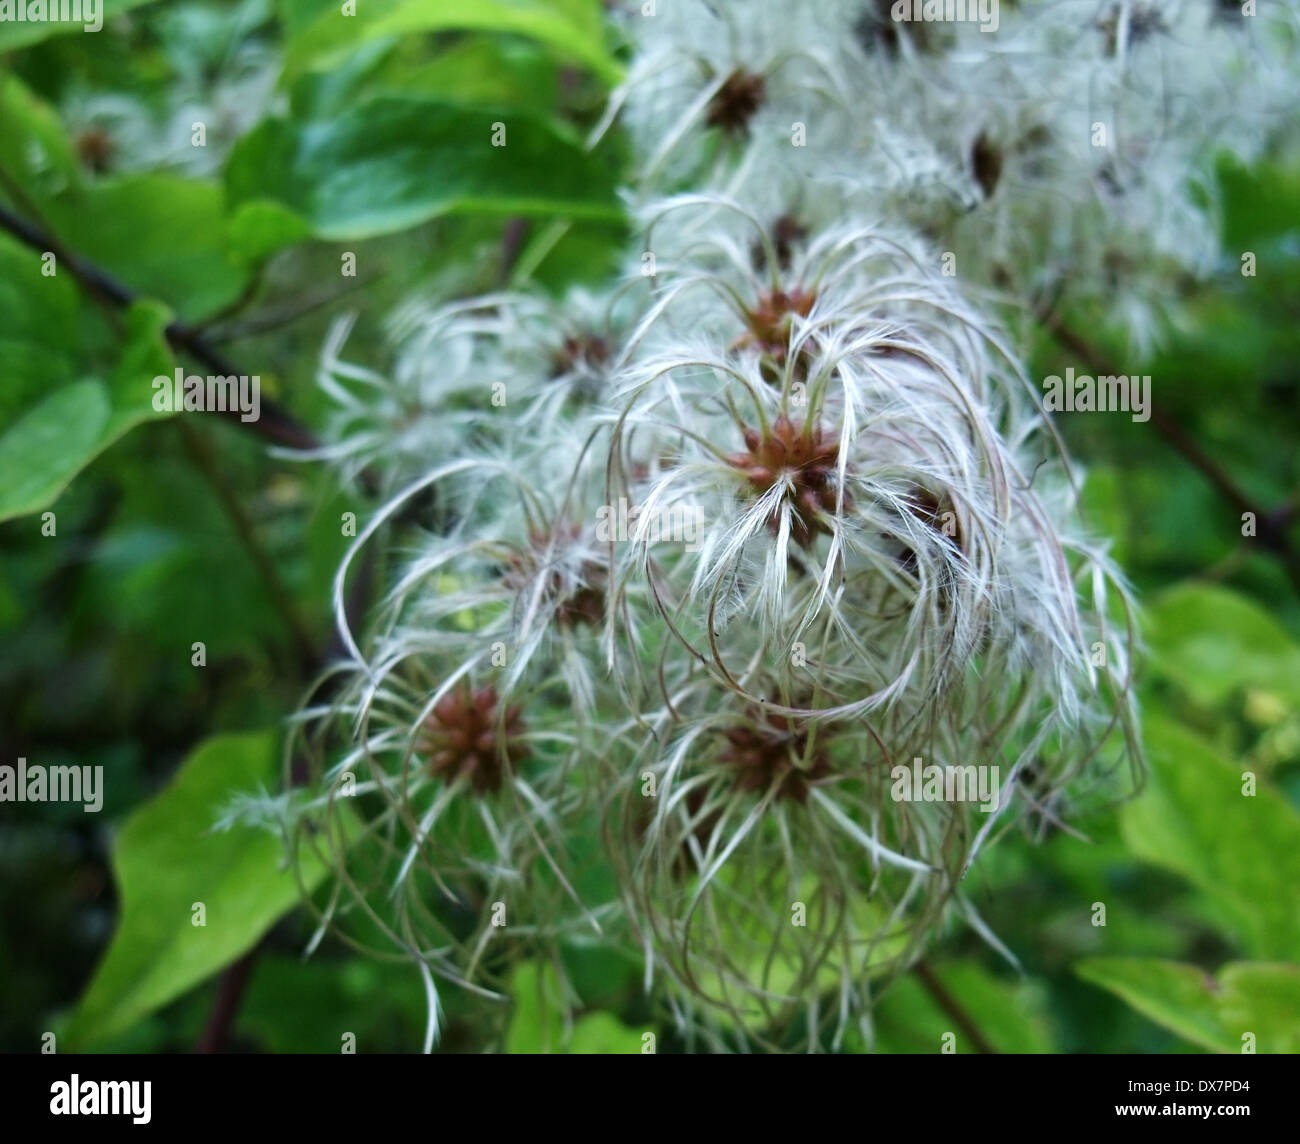 outdoor shot of some fluffy seeds at summer time in front of green leaves Stock Photo